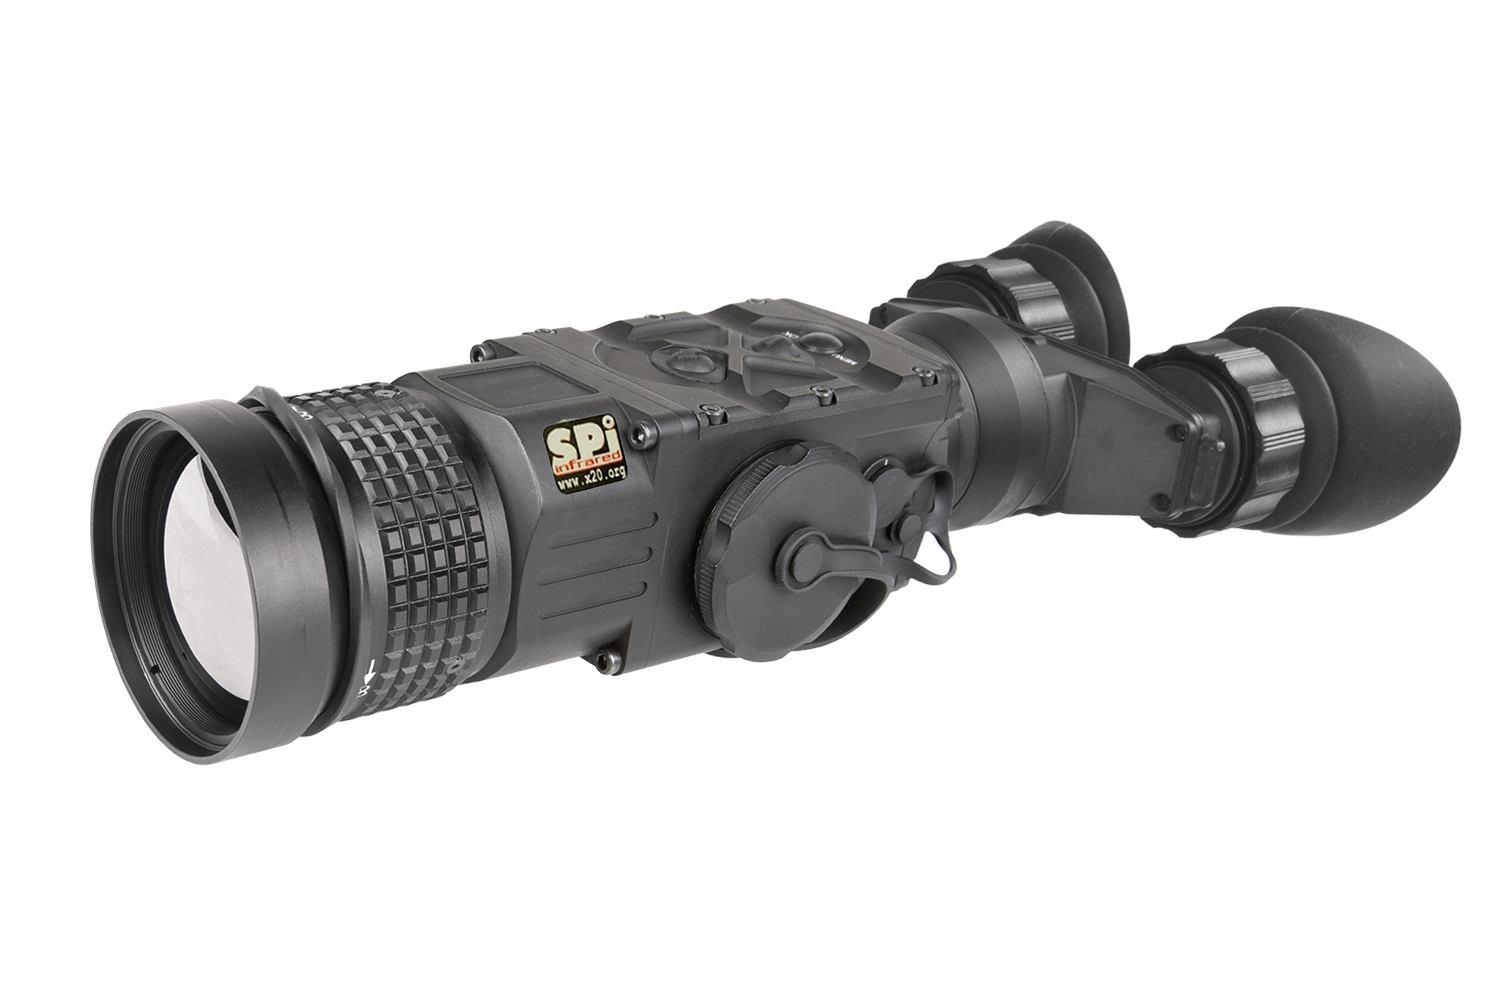 wasp t640 thermal monocular